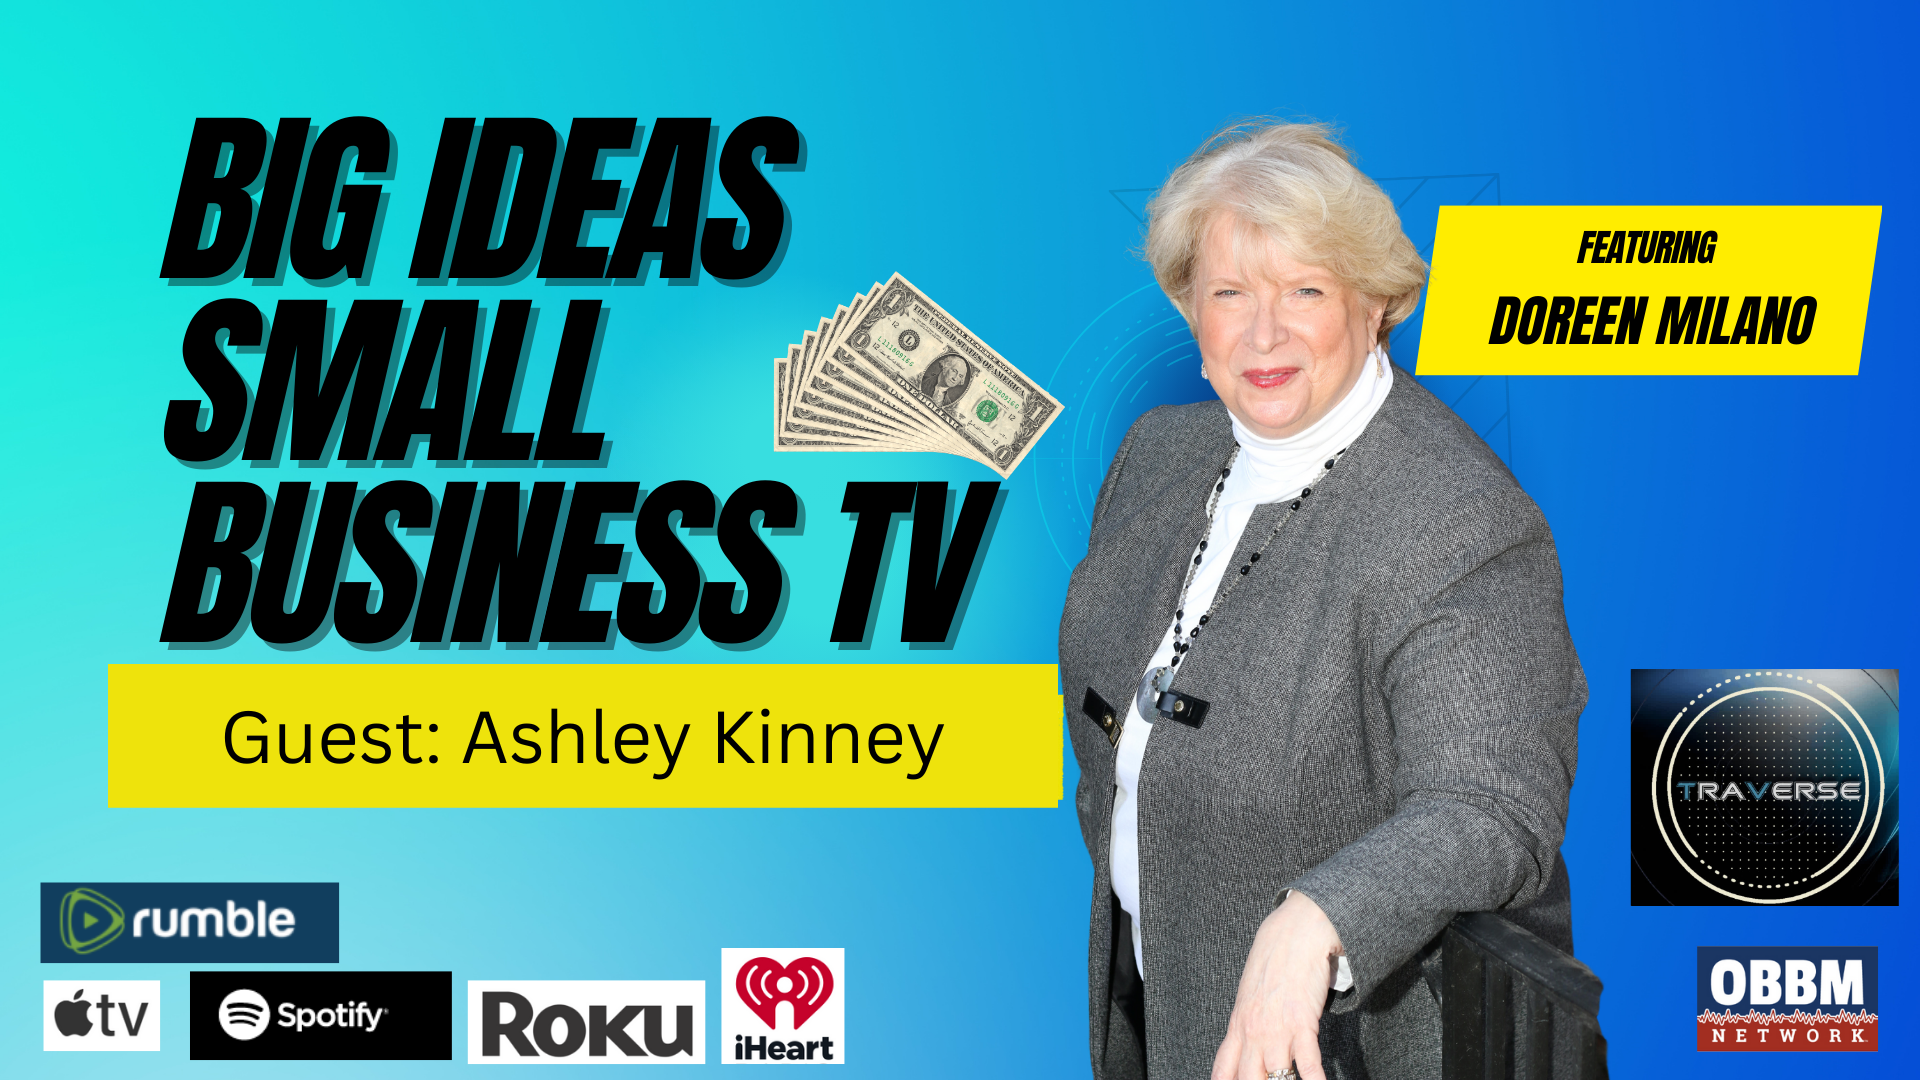 BISB26-Websites and Local DFW - Big Ideas, Small Business TV with Doreen Milano